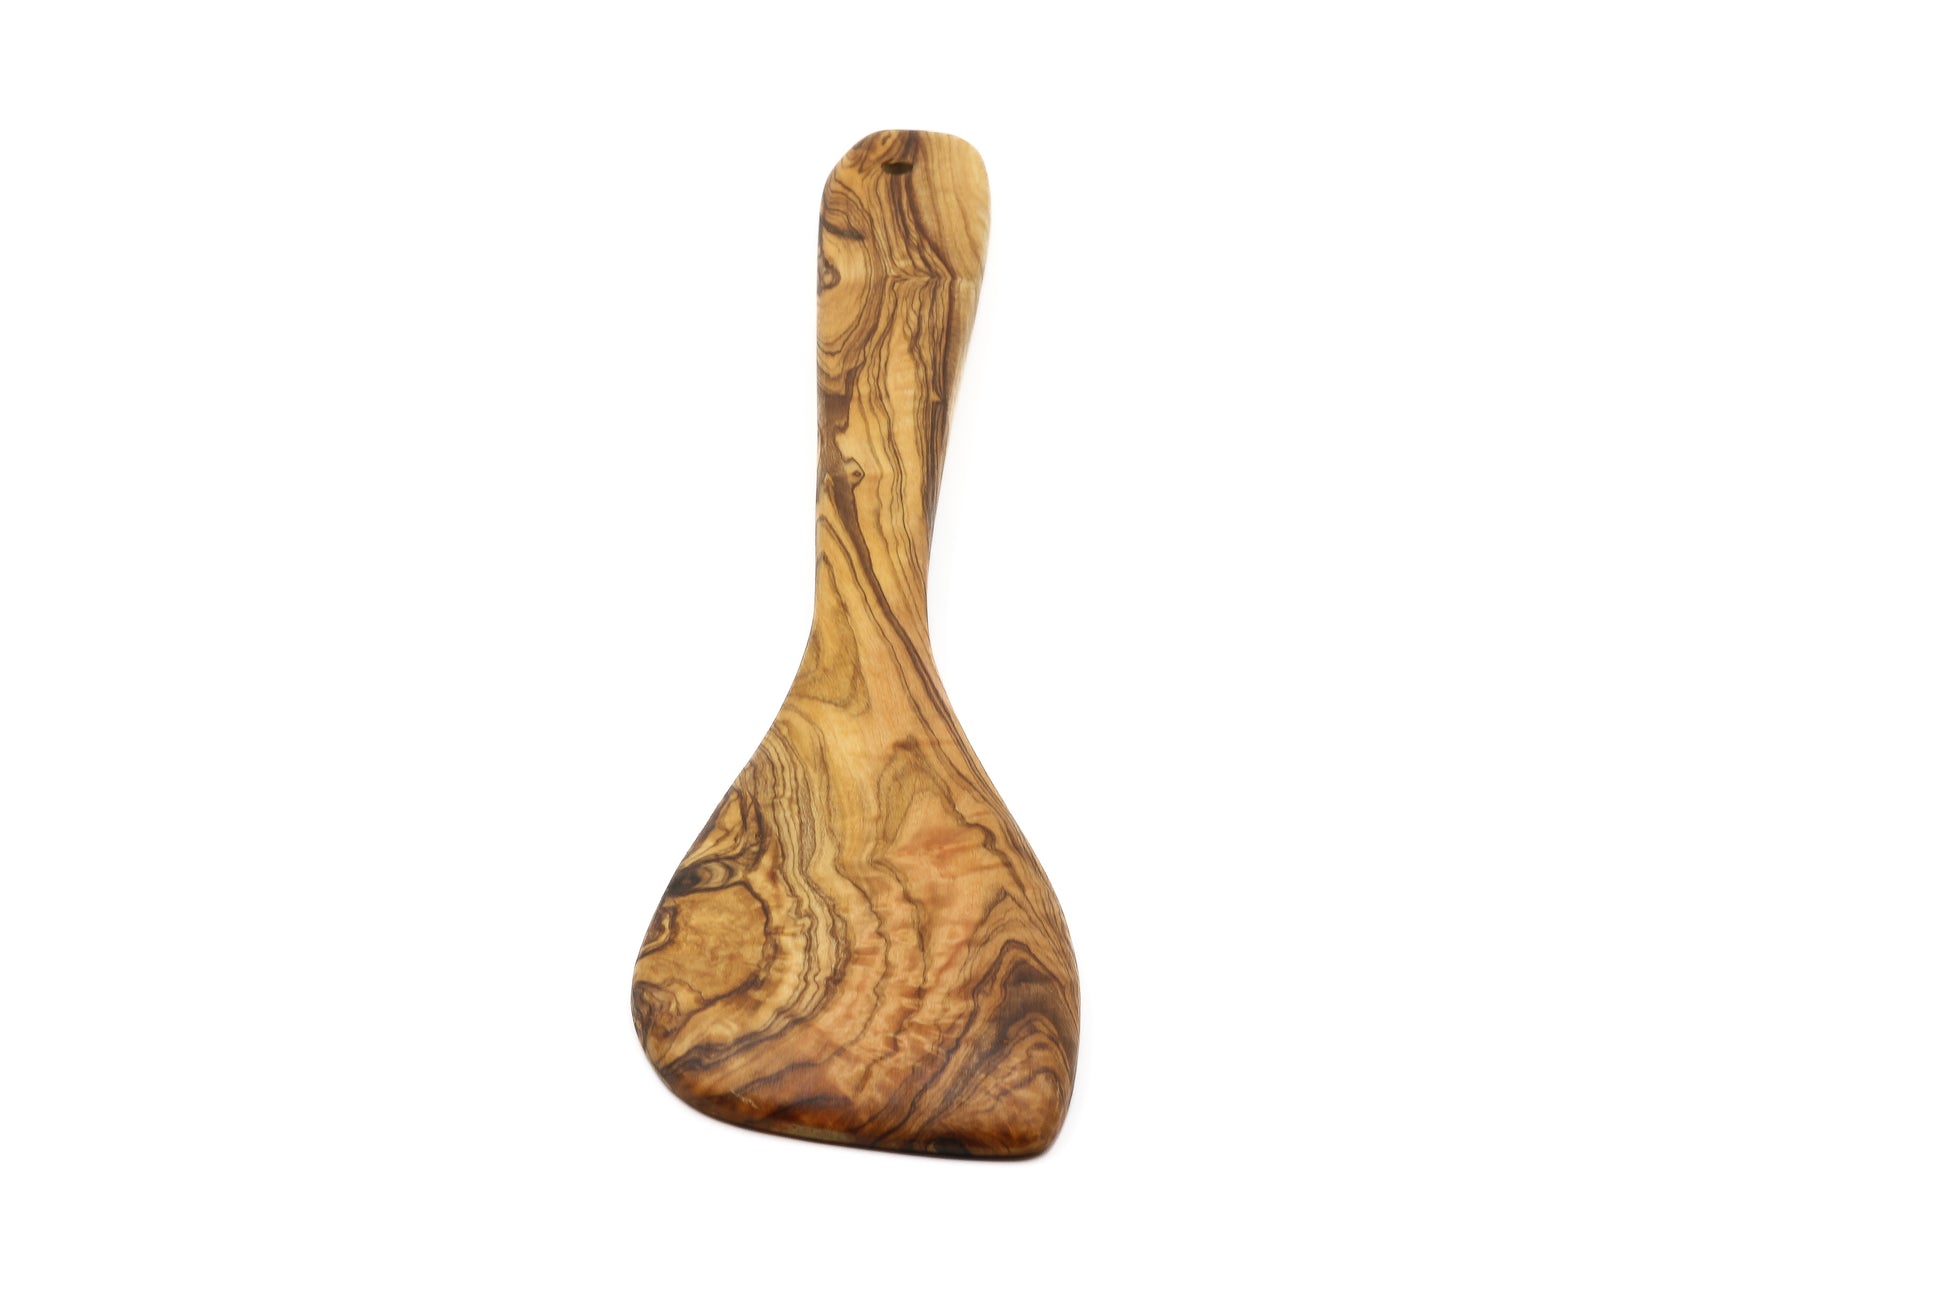 Eco-friendly olive wood kitchen utensil with a hand-finished touch